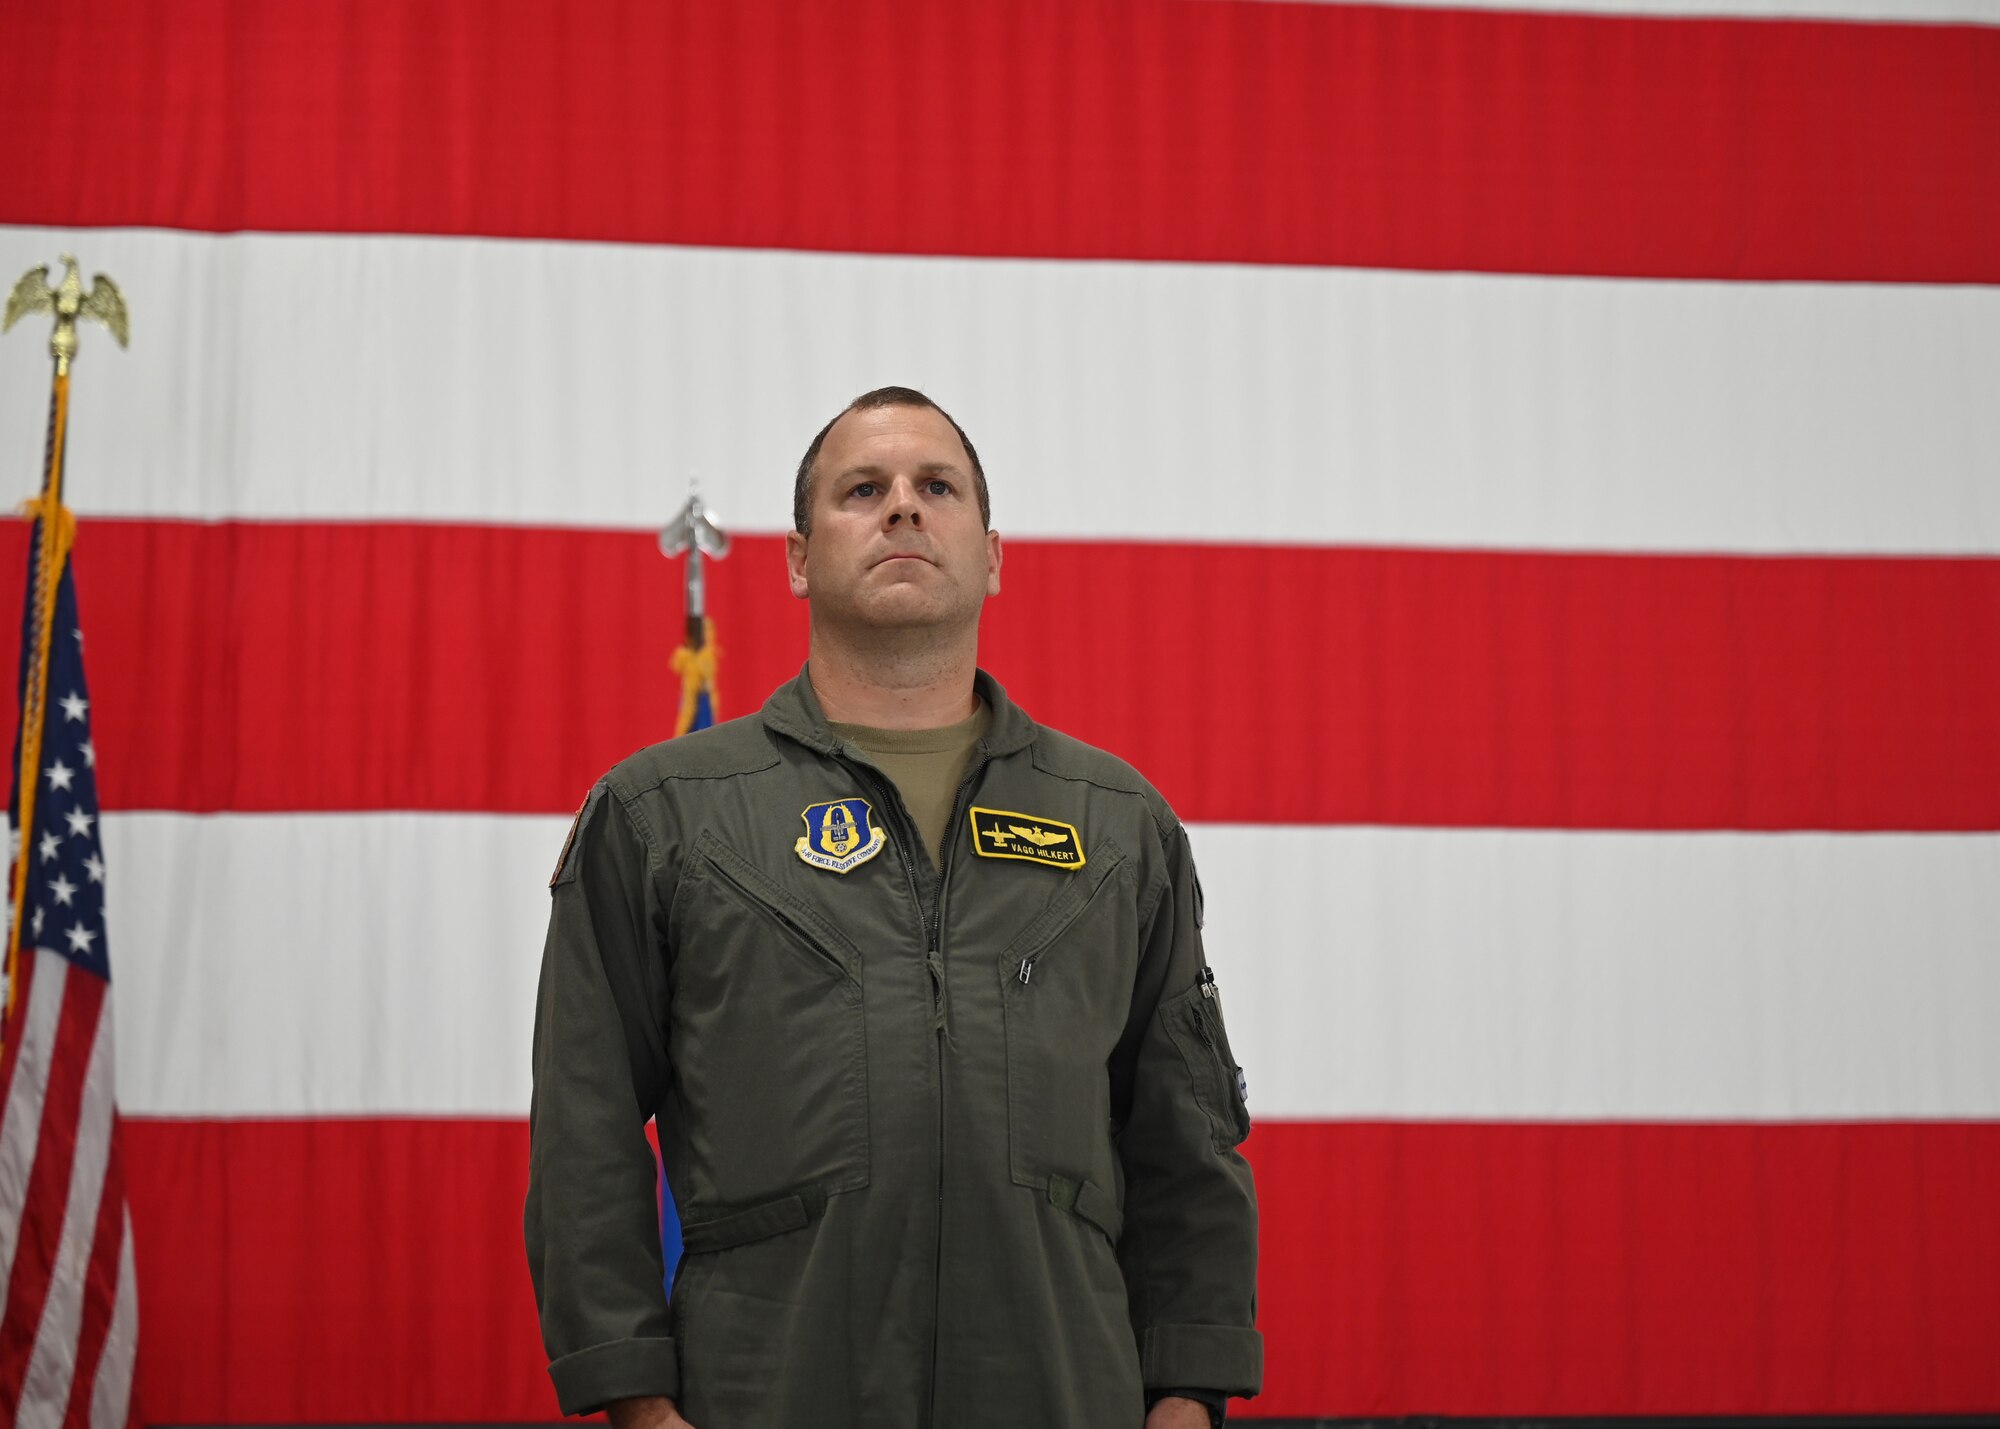 A man stands in front of a large American flag wearing green coveralls. The patch on his left breast reads "Vago Hilkert".